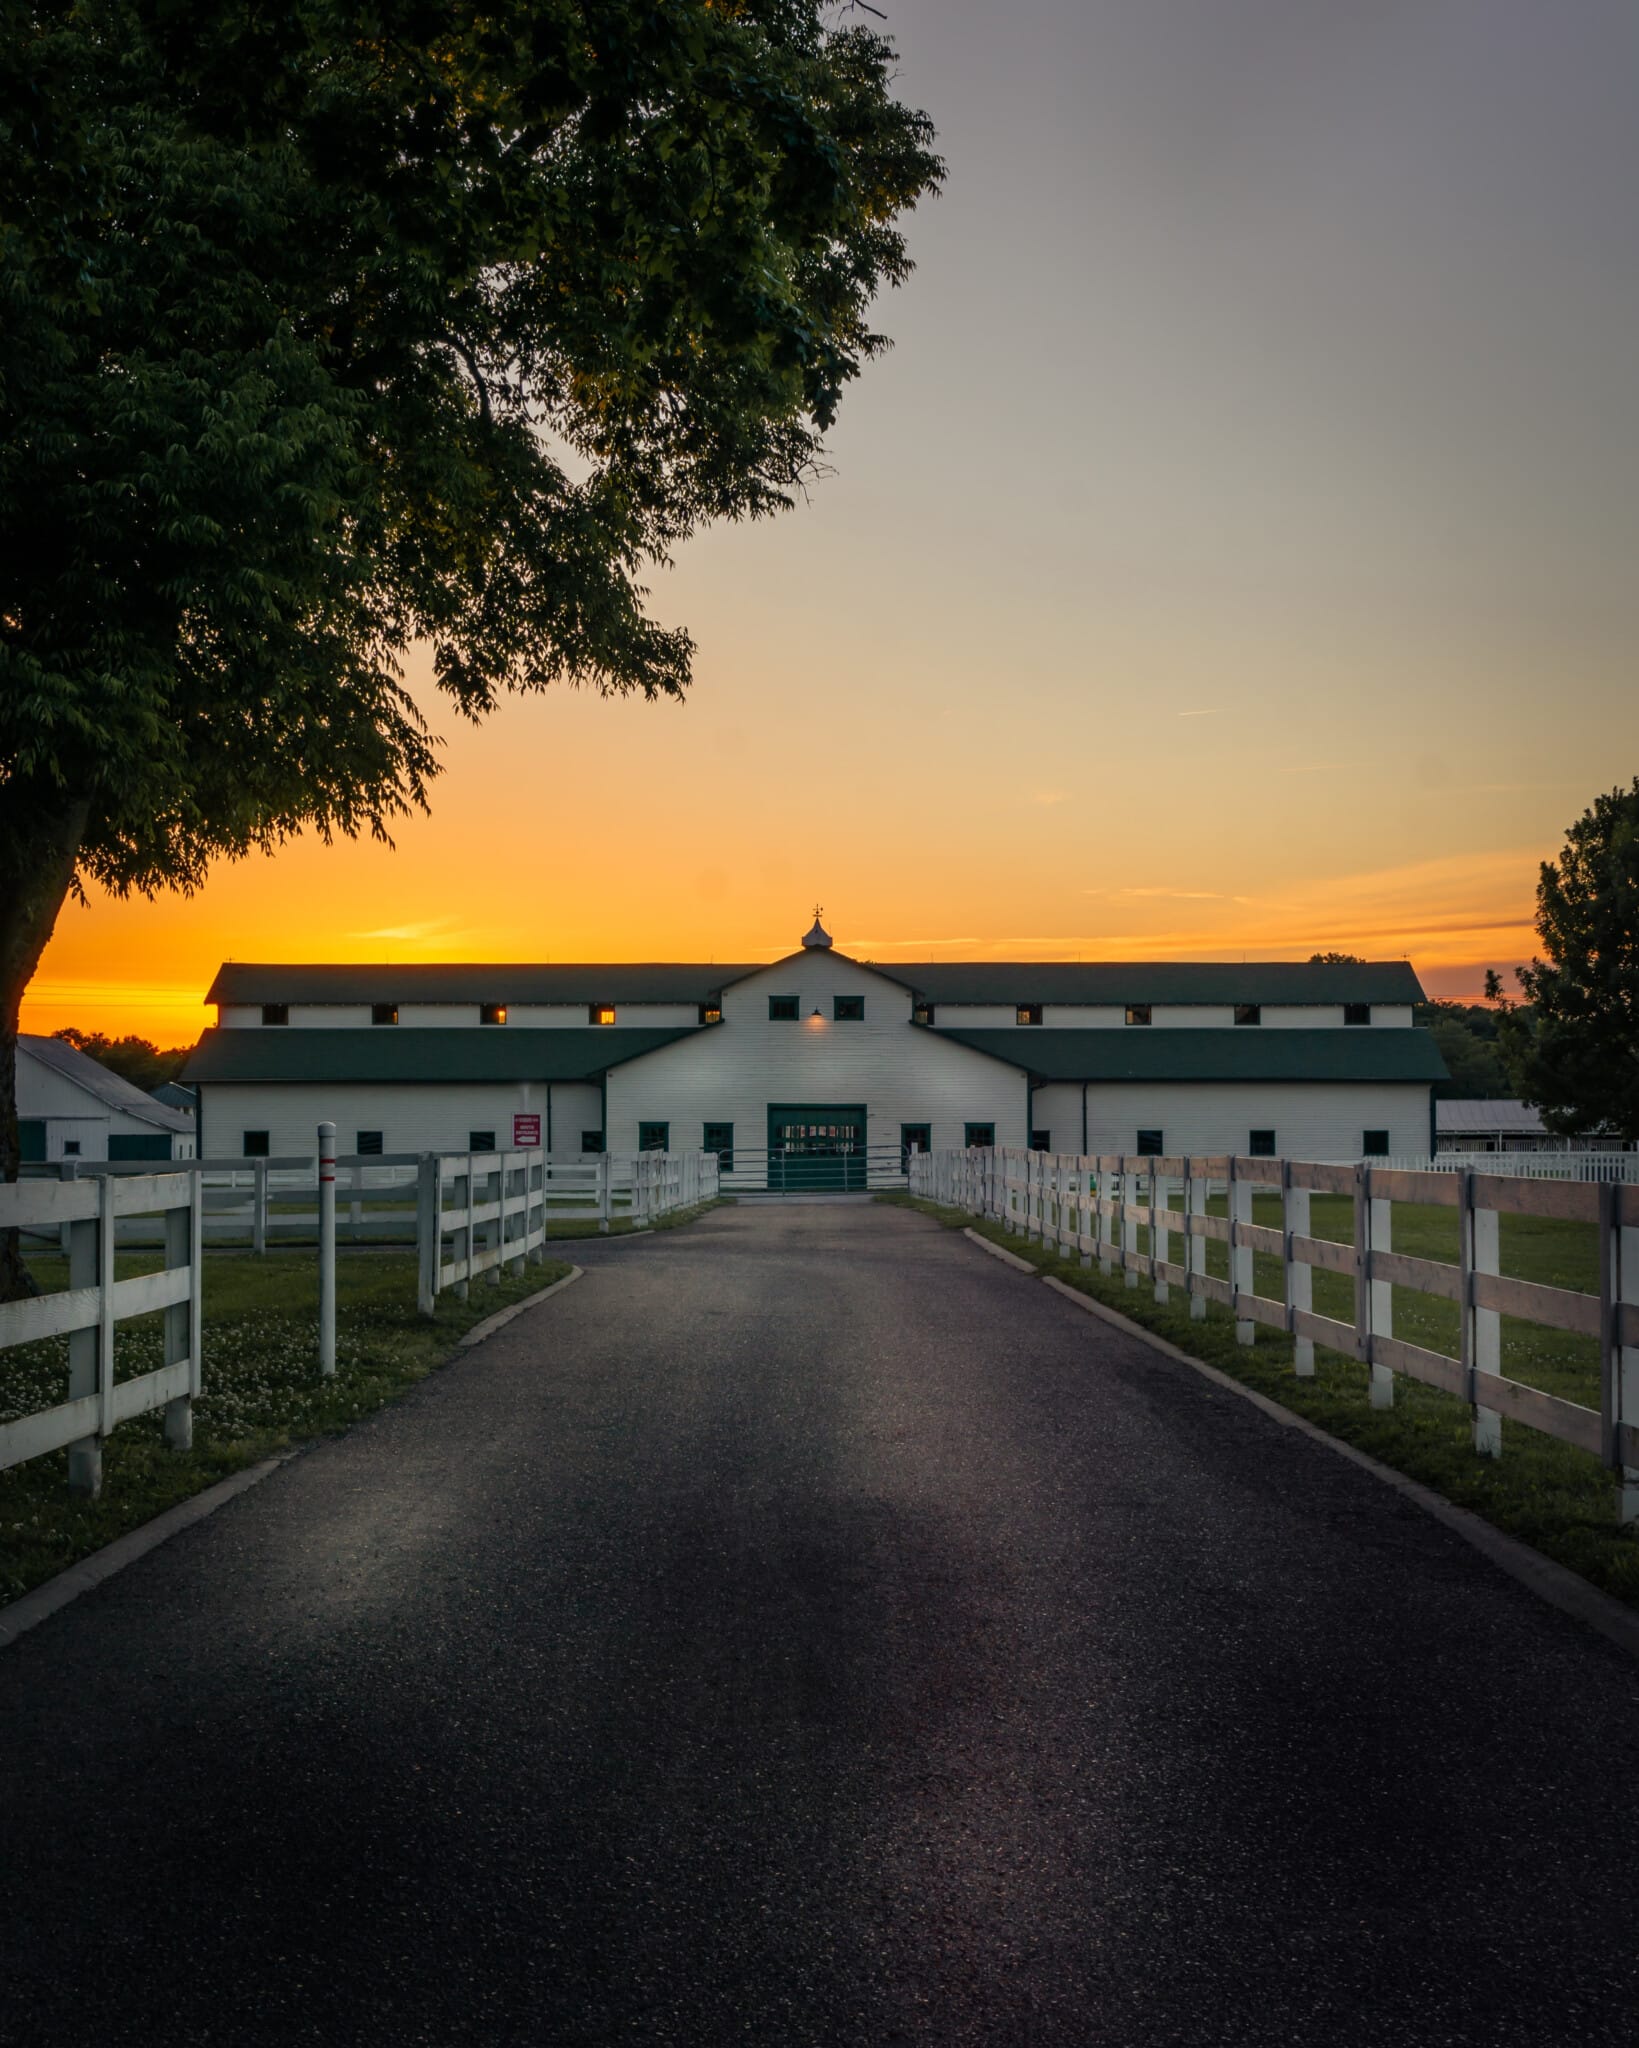 White barn with white fence, sun setting in the background.